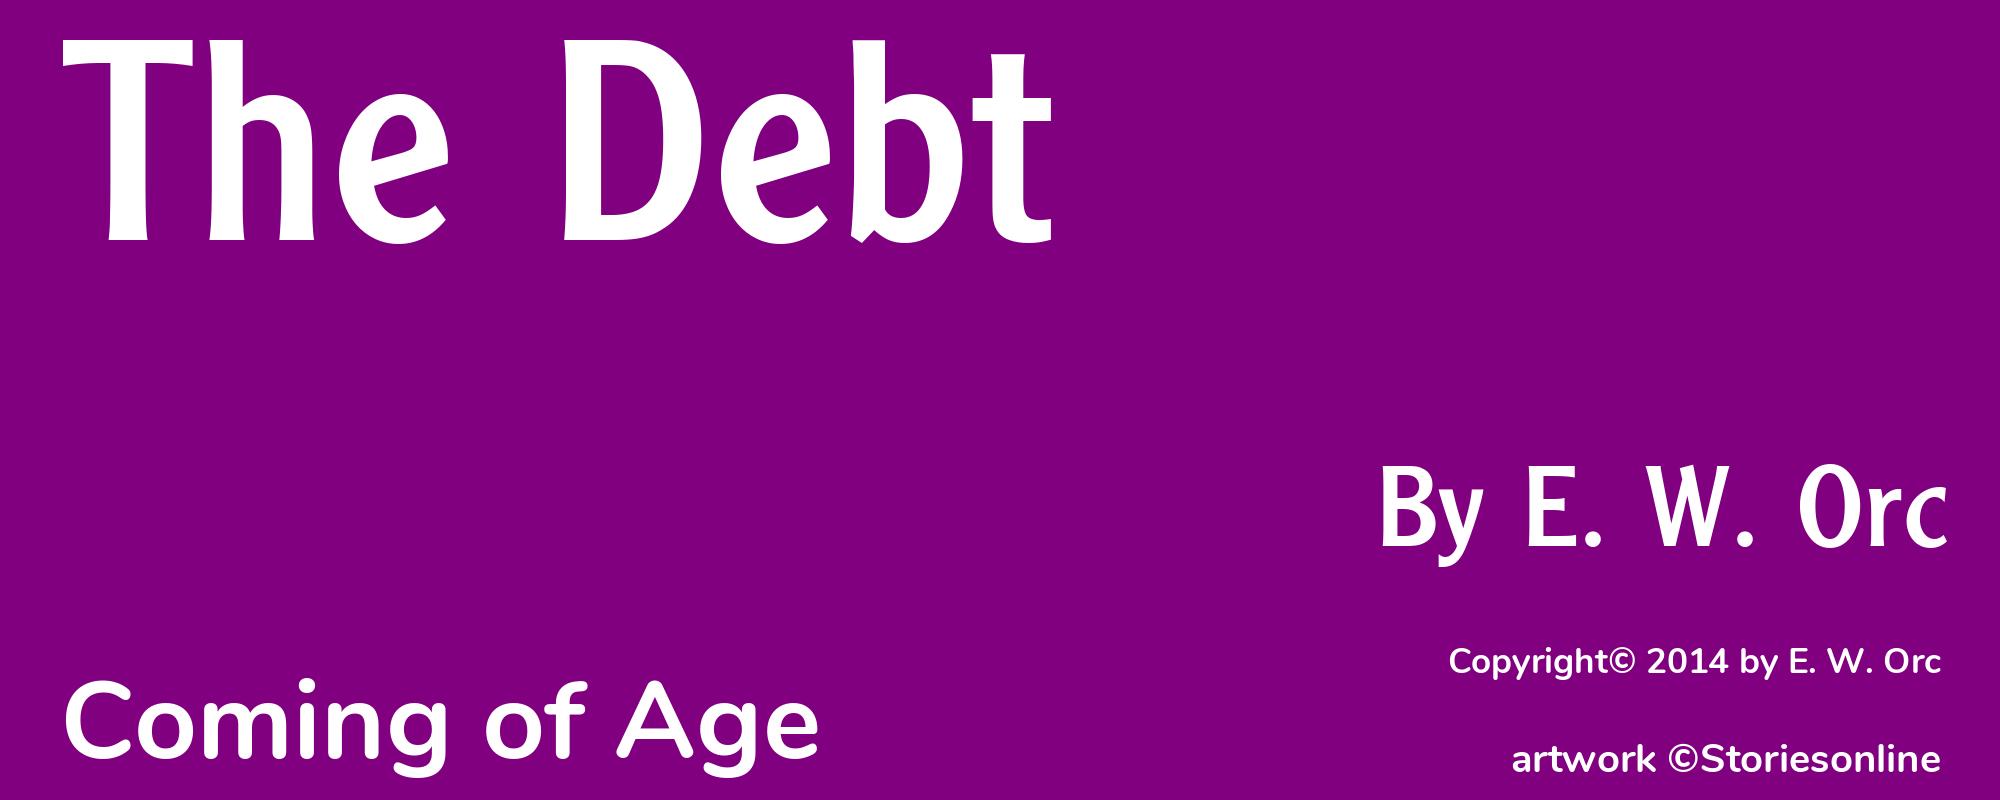 The Debt - Cover